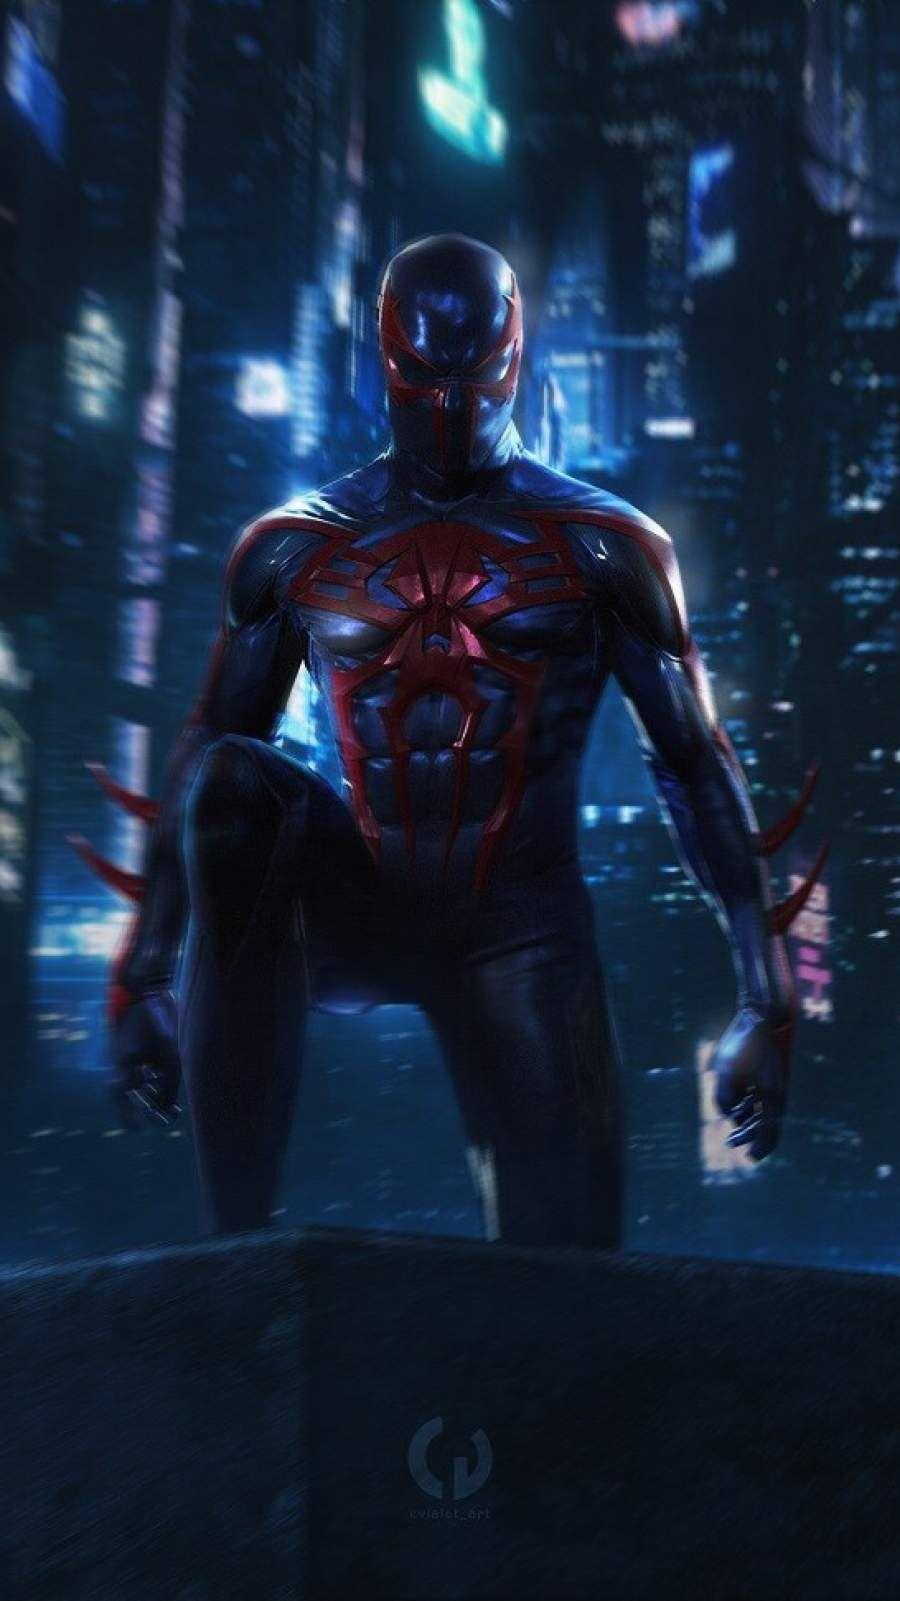 SpiderMan Wallpapers for Phone